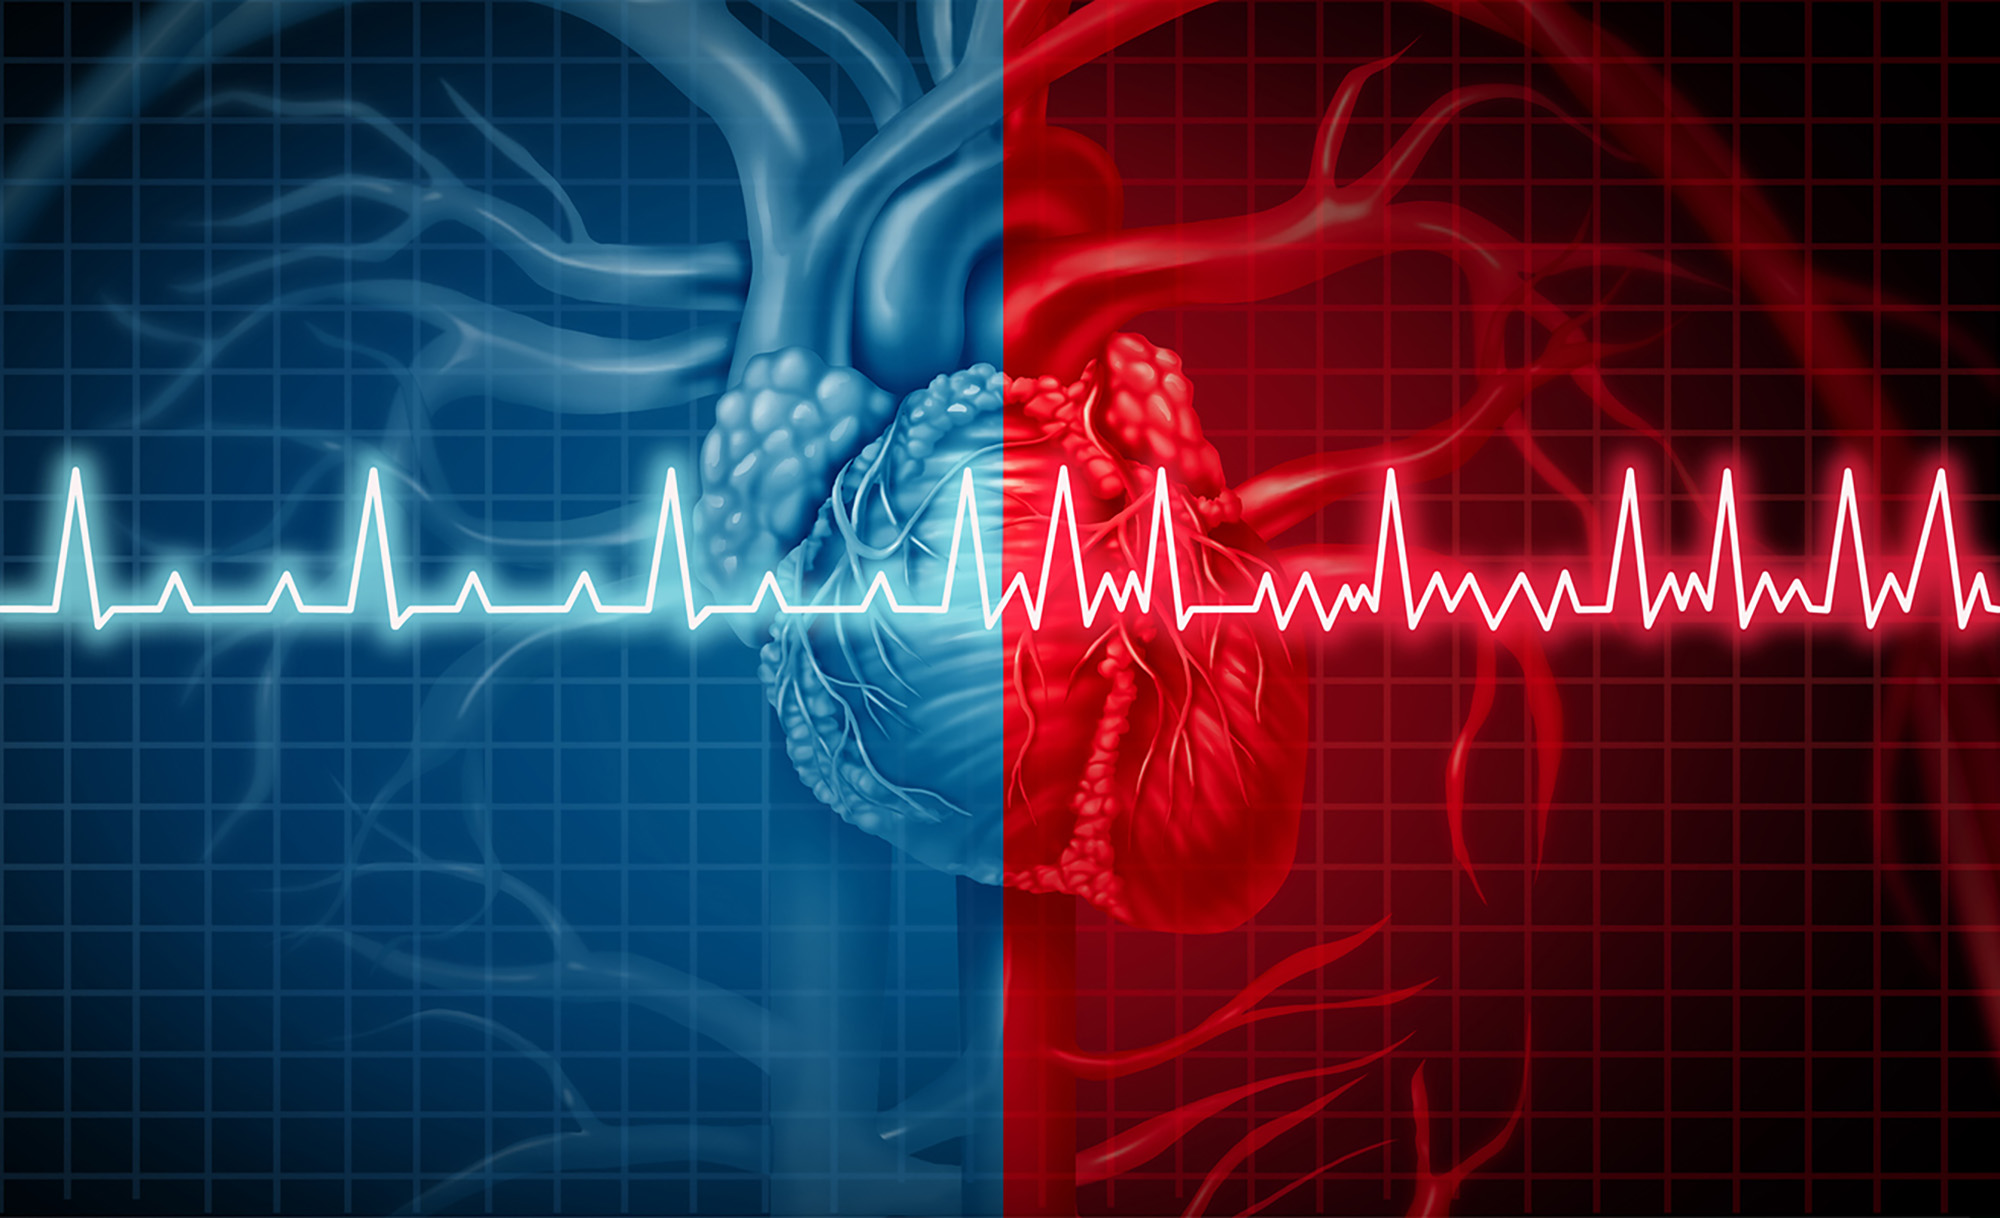 heart overlaid with depiction of irregular heartbeat